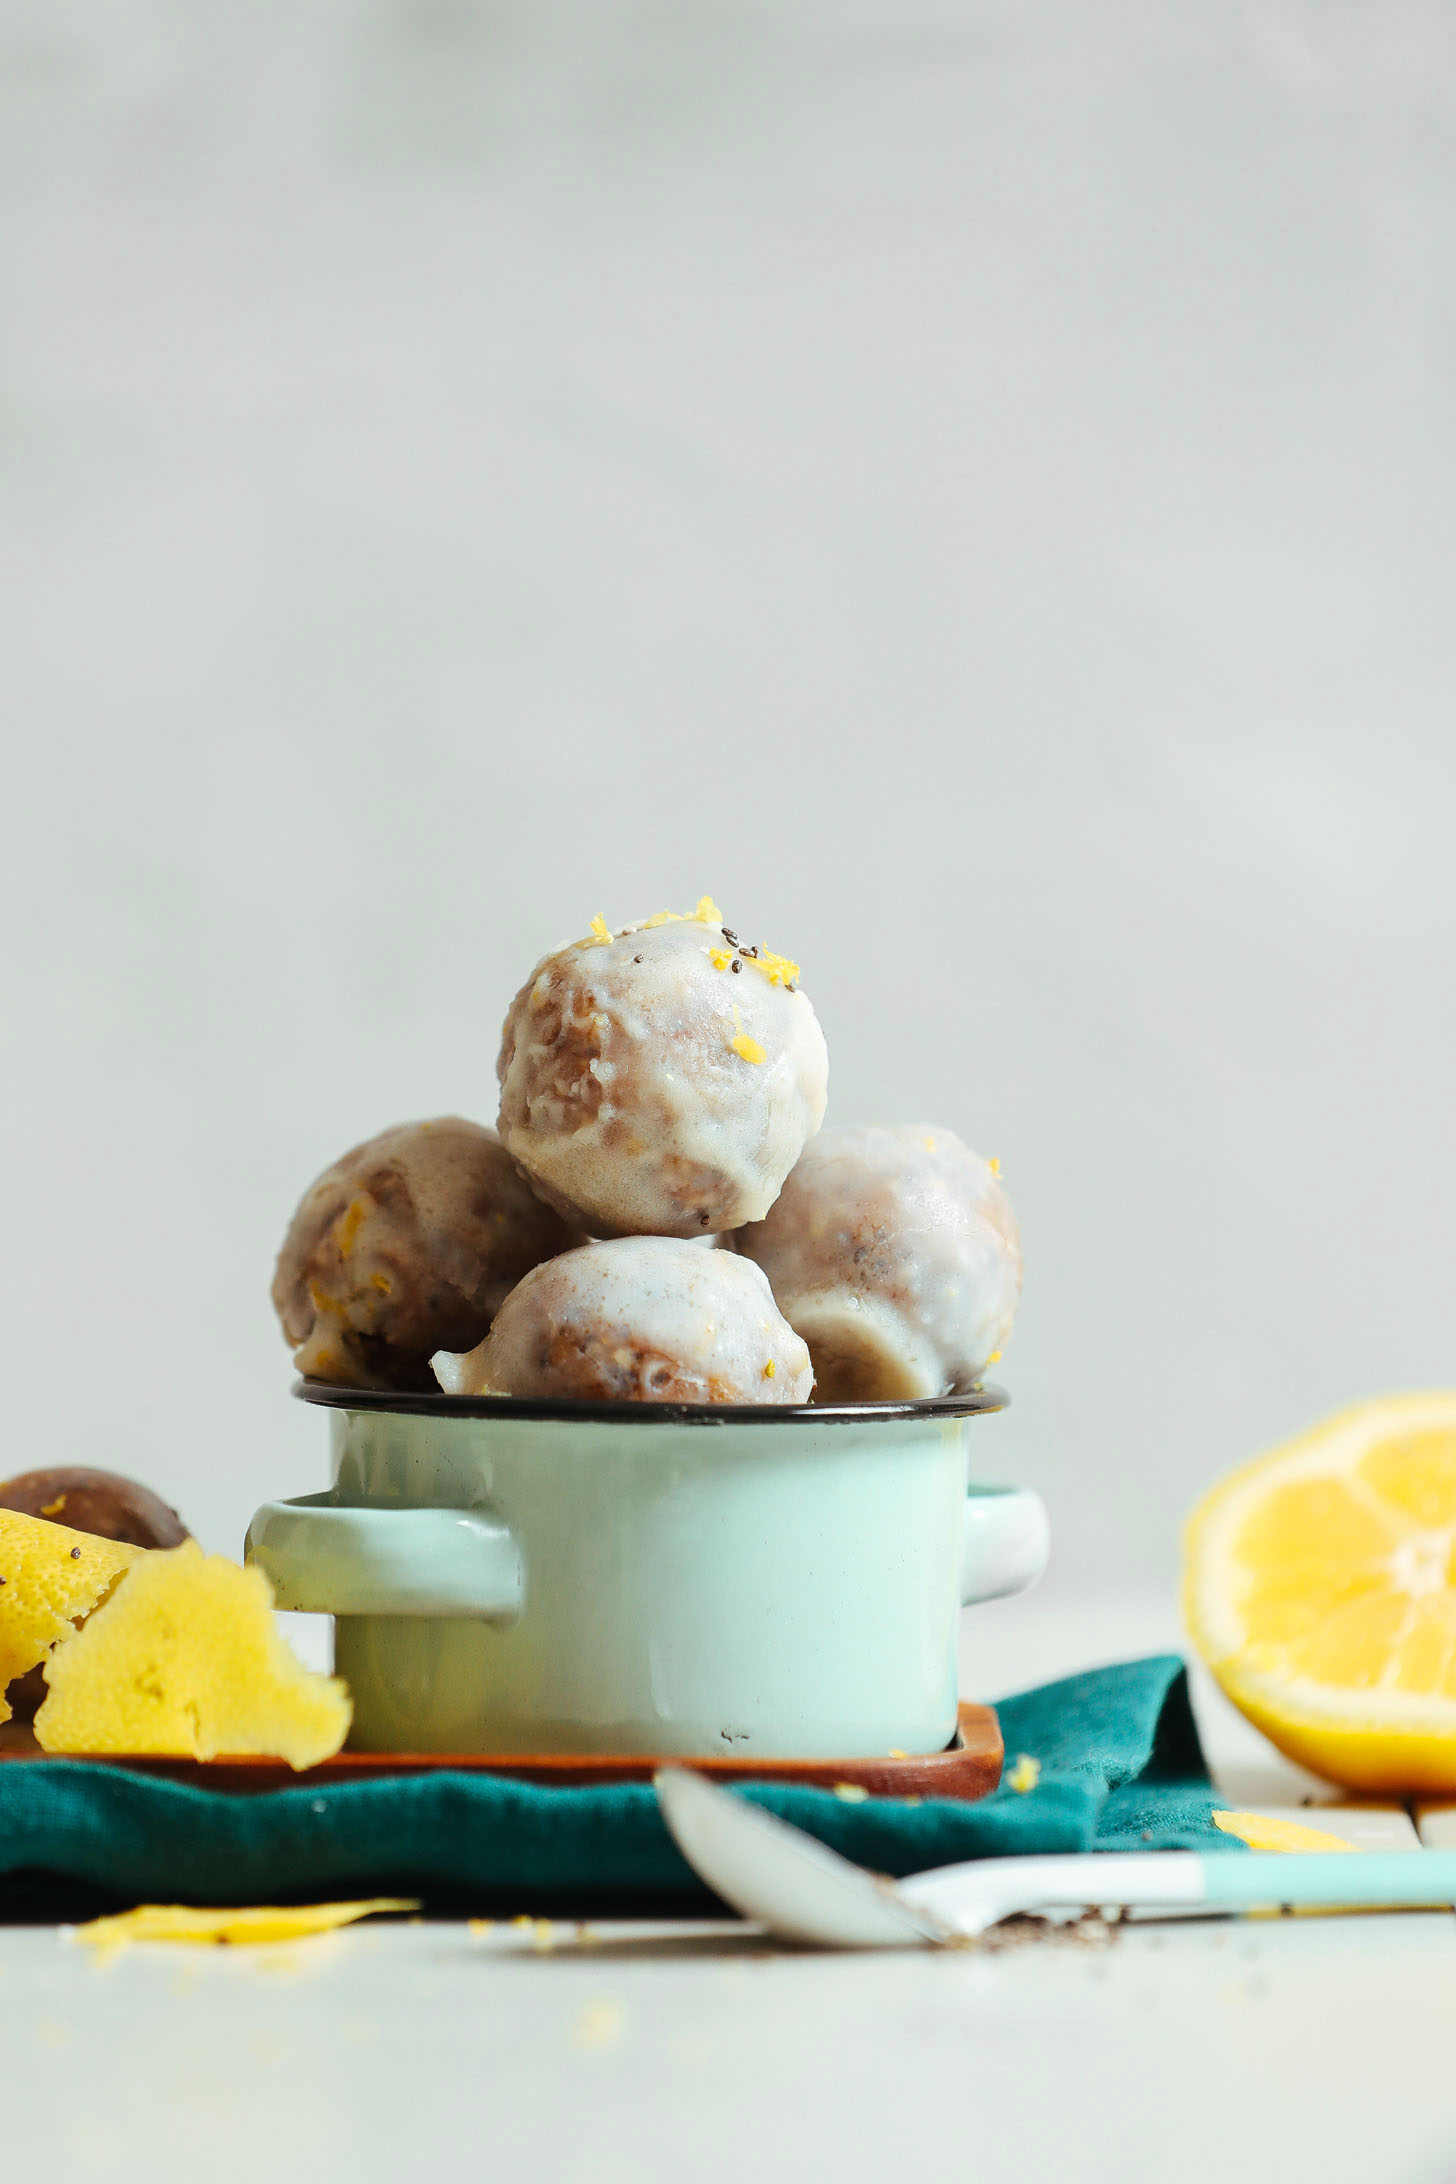 A small blue bowl with no bake vegan donut holes that are scented with lemon zest, lemon juice, and poppy seeds.